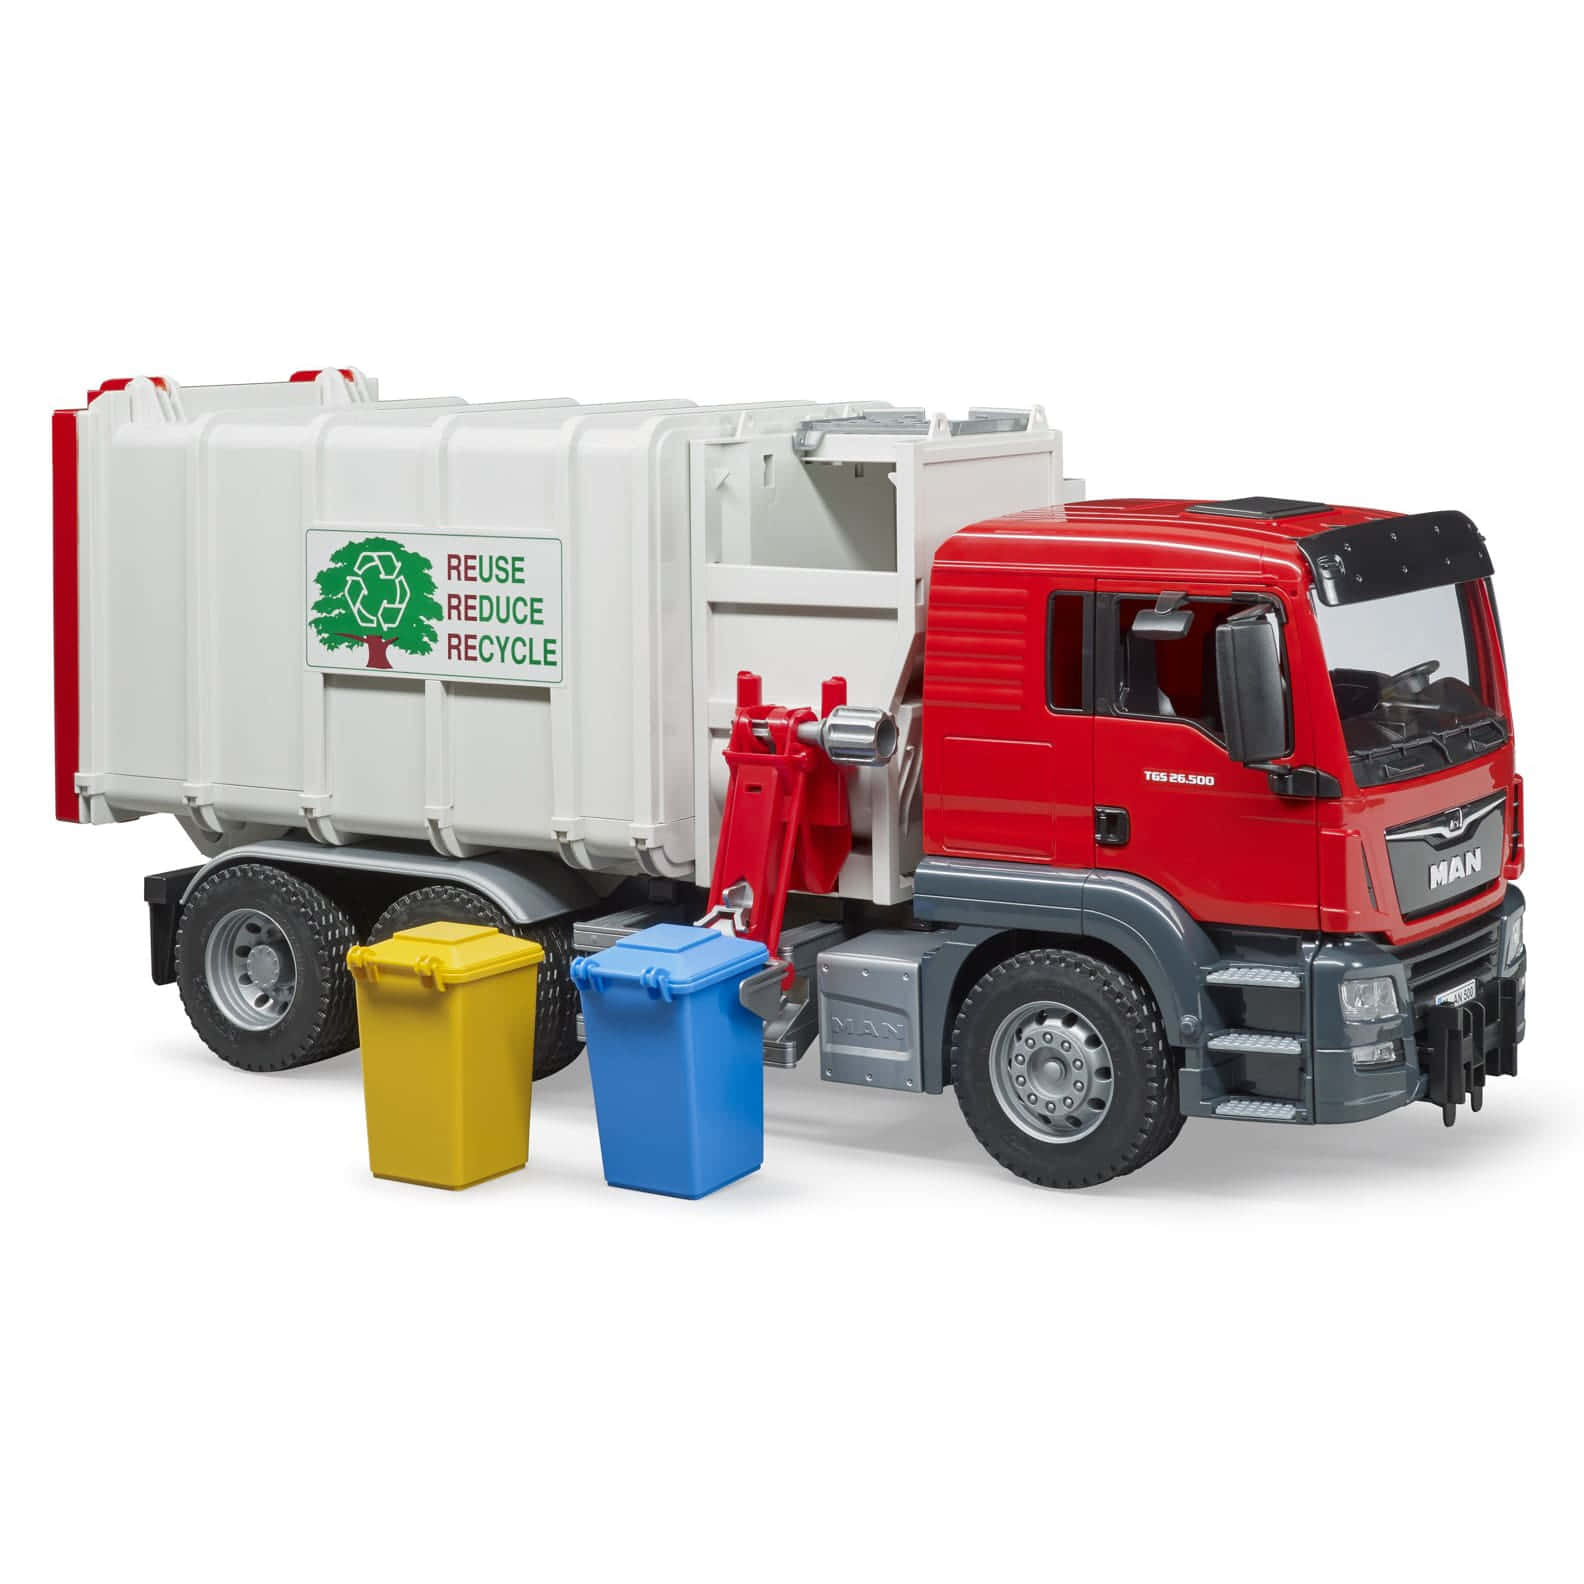 A Toy Garbage Truck With A Trash Can